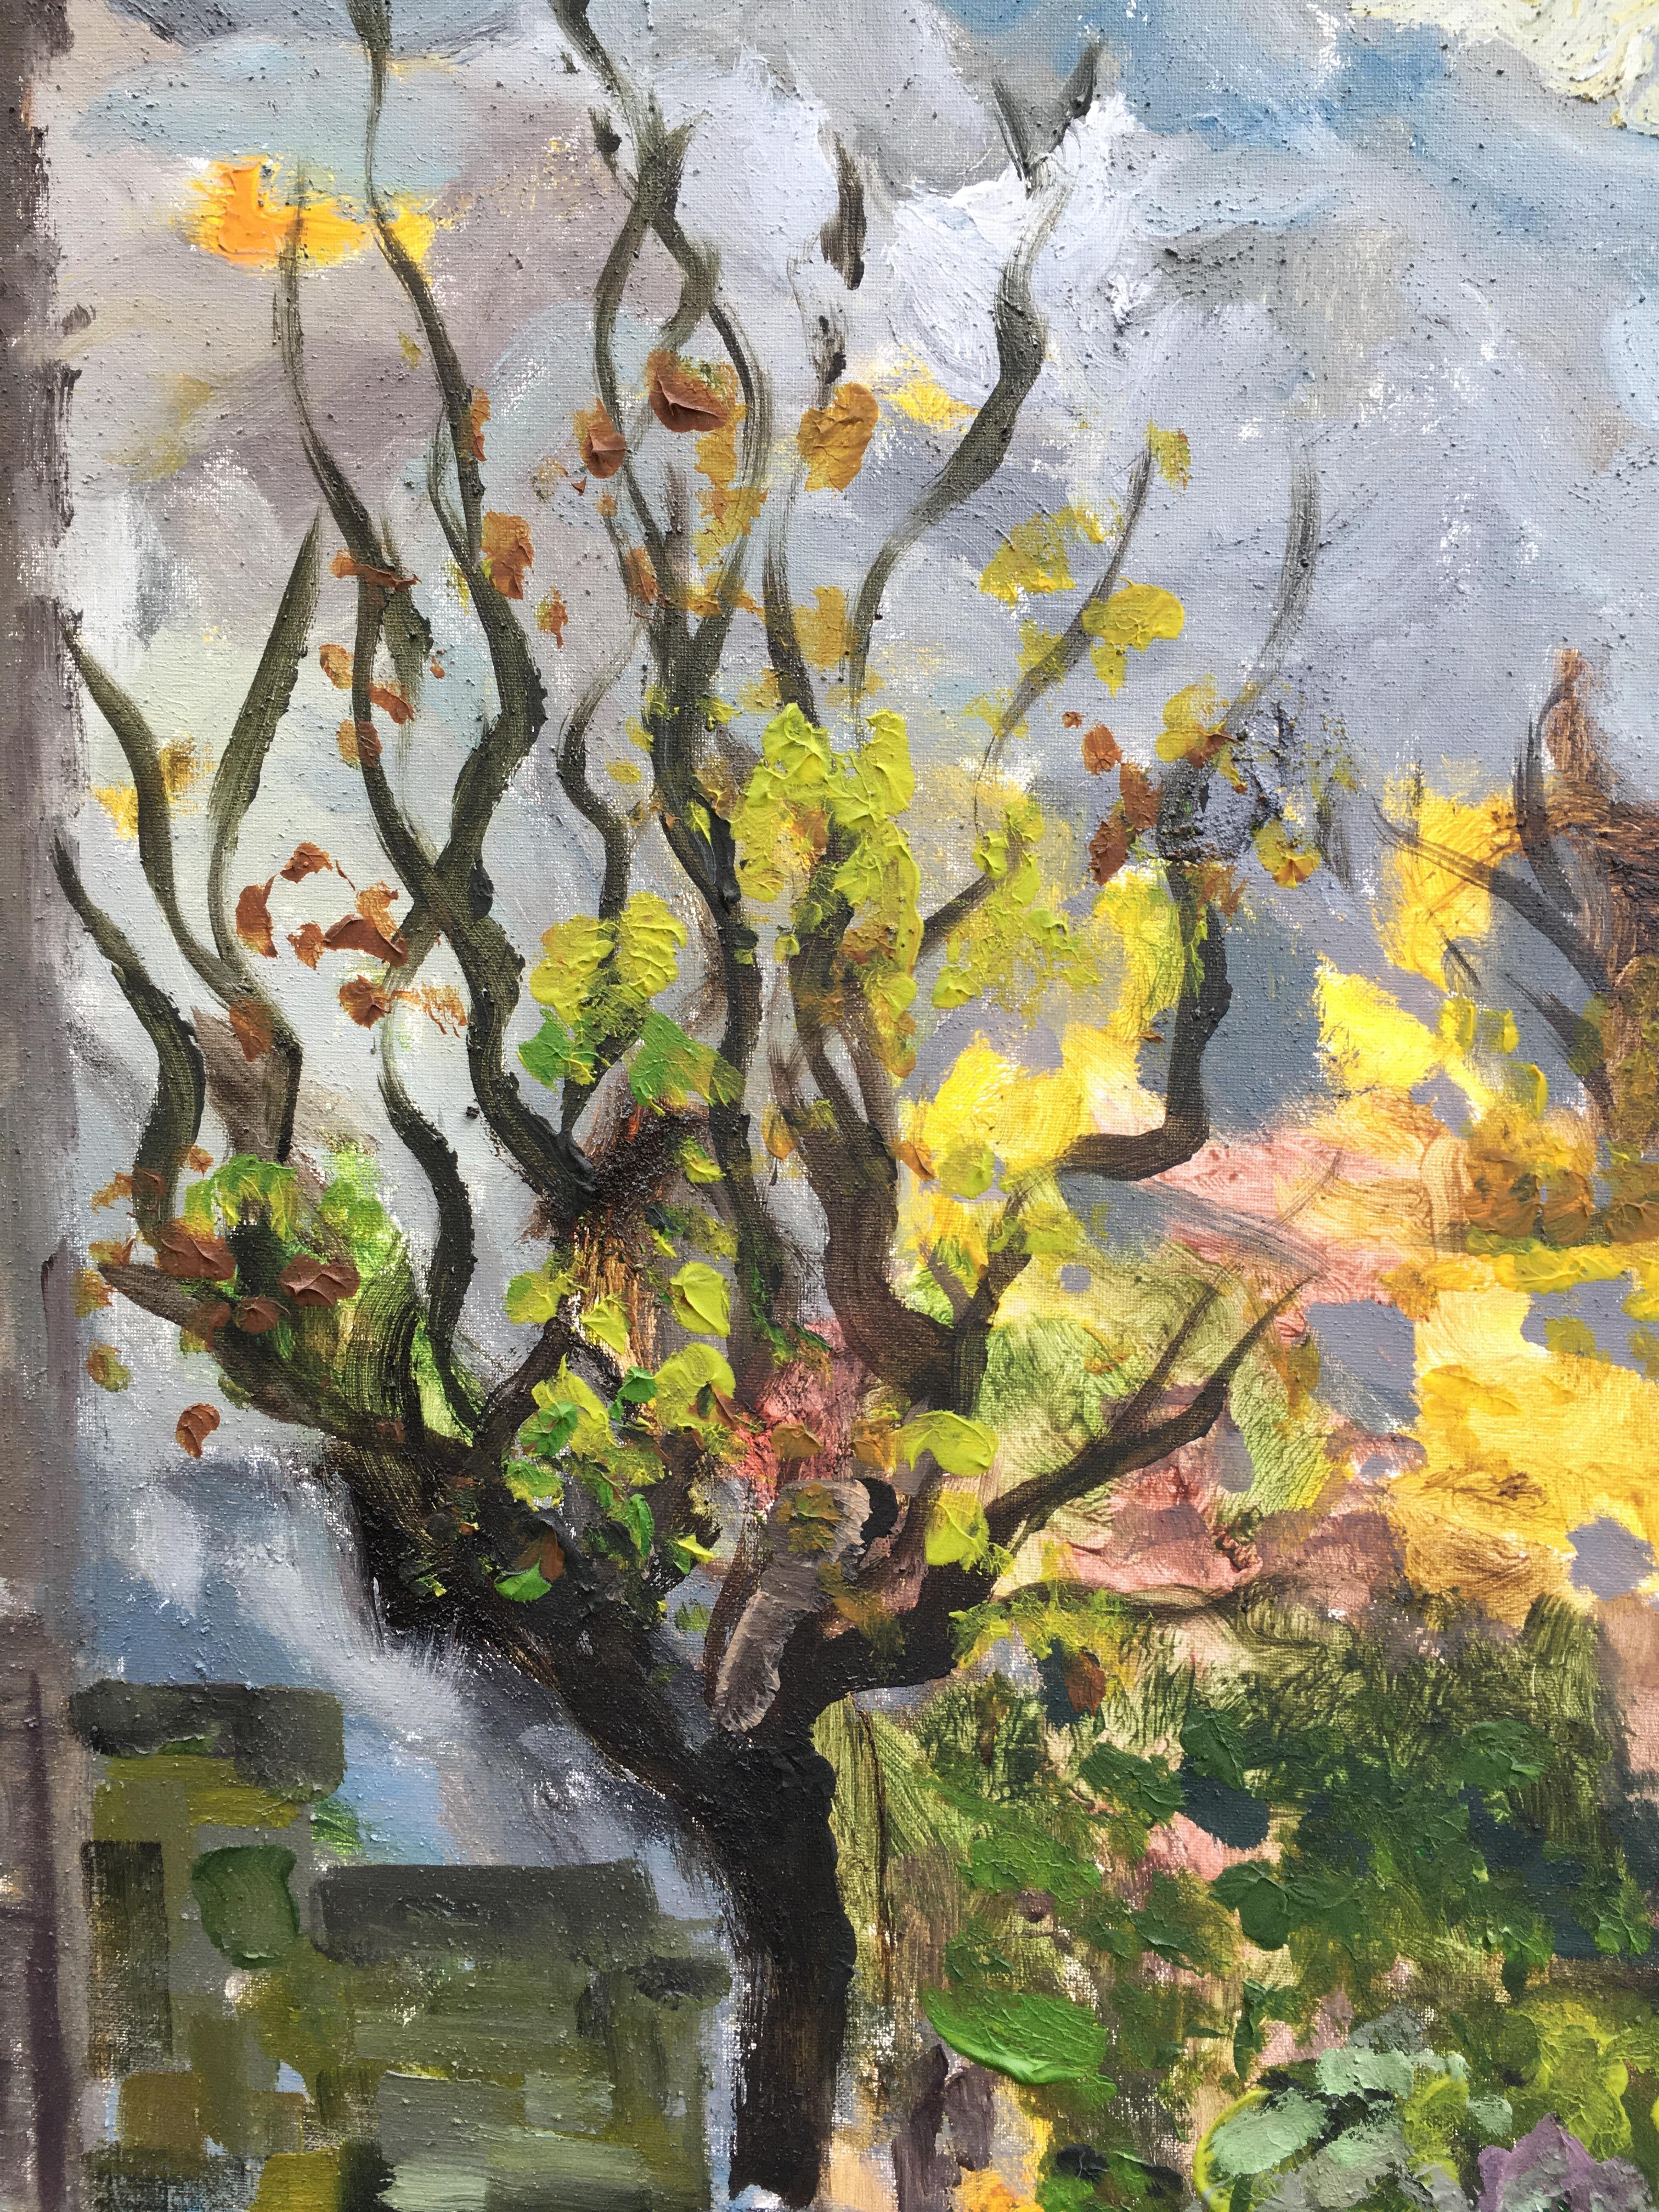 To document the streets they've walked and her late dog's favourite trees, Shizico embarked on a series of Plein air paintings in autumn, the season when Favor died. This is the view from their garden to the streets.

The colours of the turning